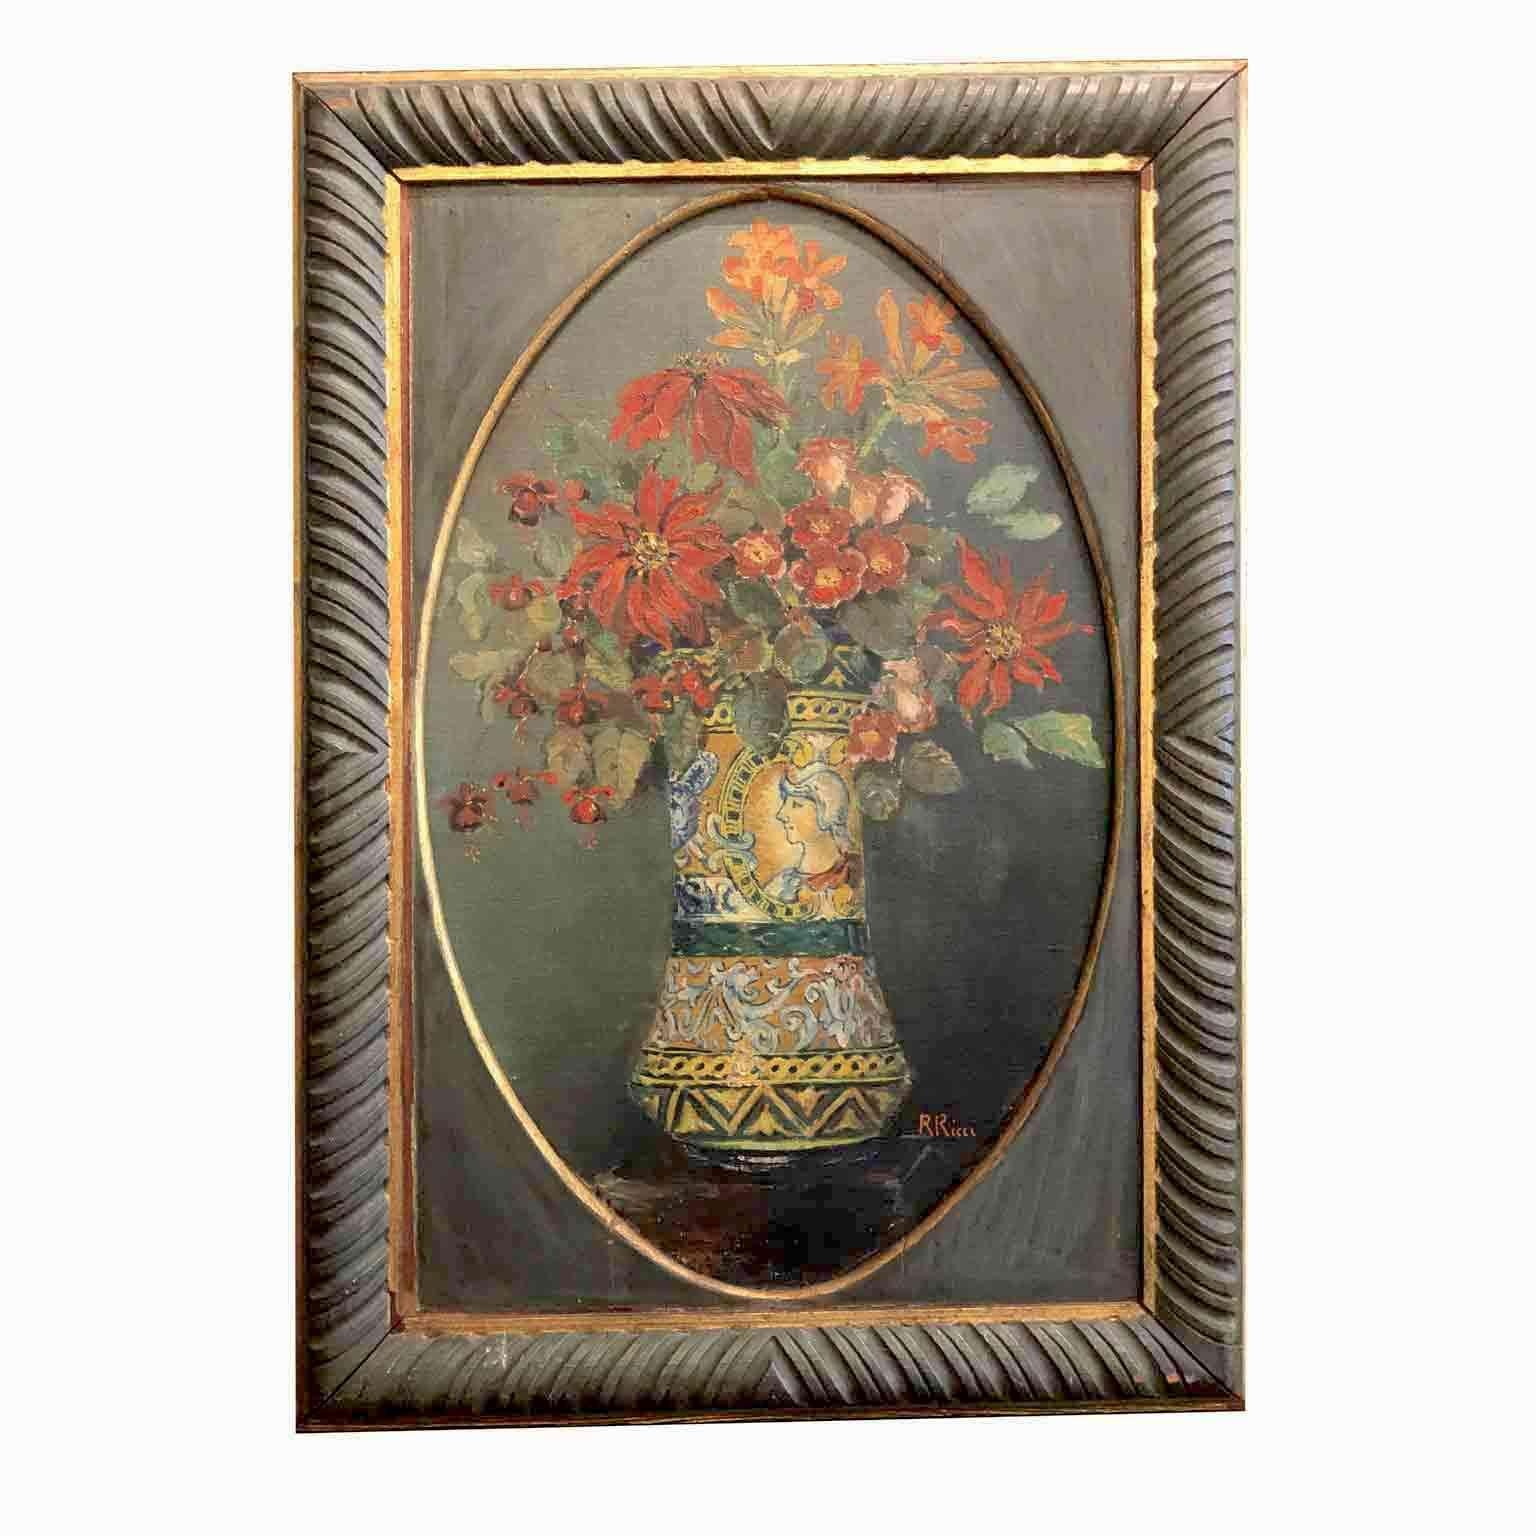 Pair of Italian Flower Still life Paintings by Ricci 20th Century Green Frames For Sale 6